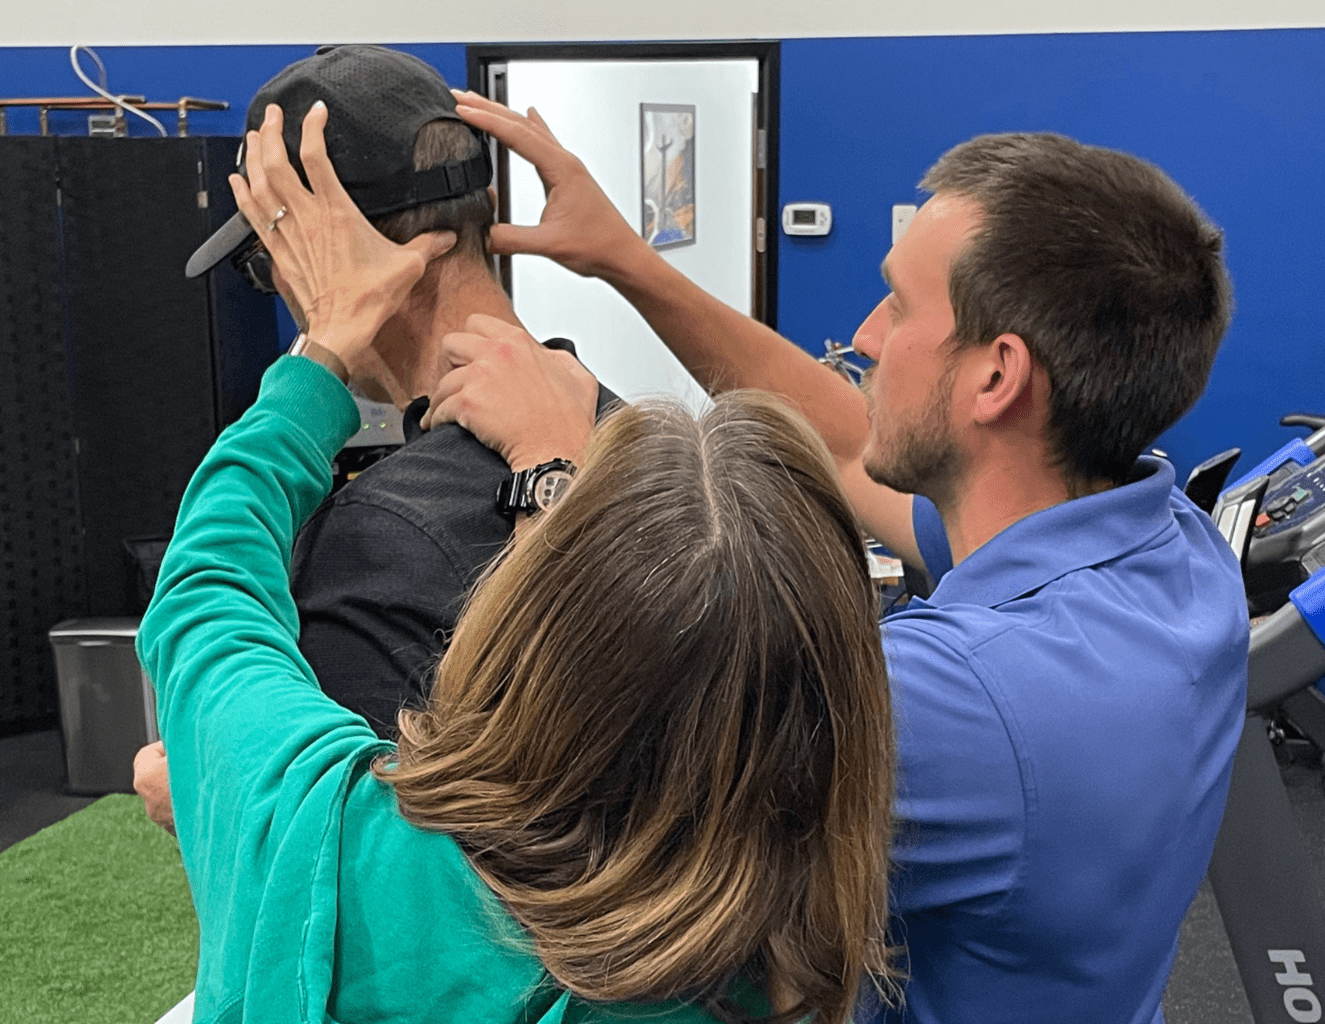 Dr. Jake showing couple how to hit tension headache trigger points